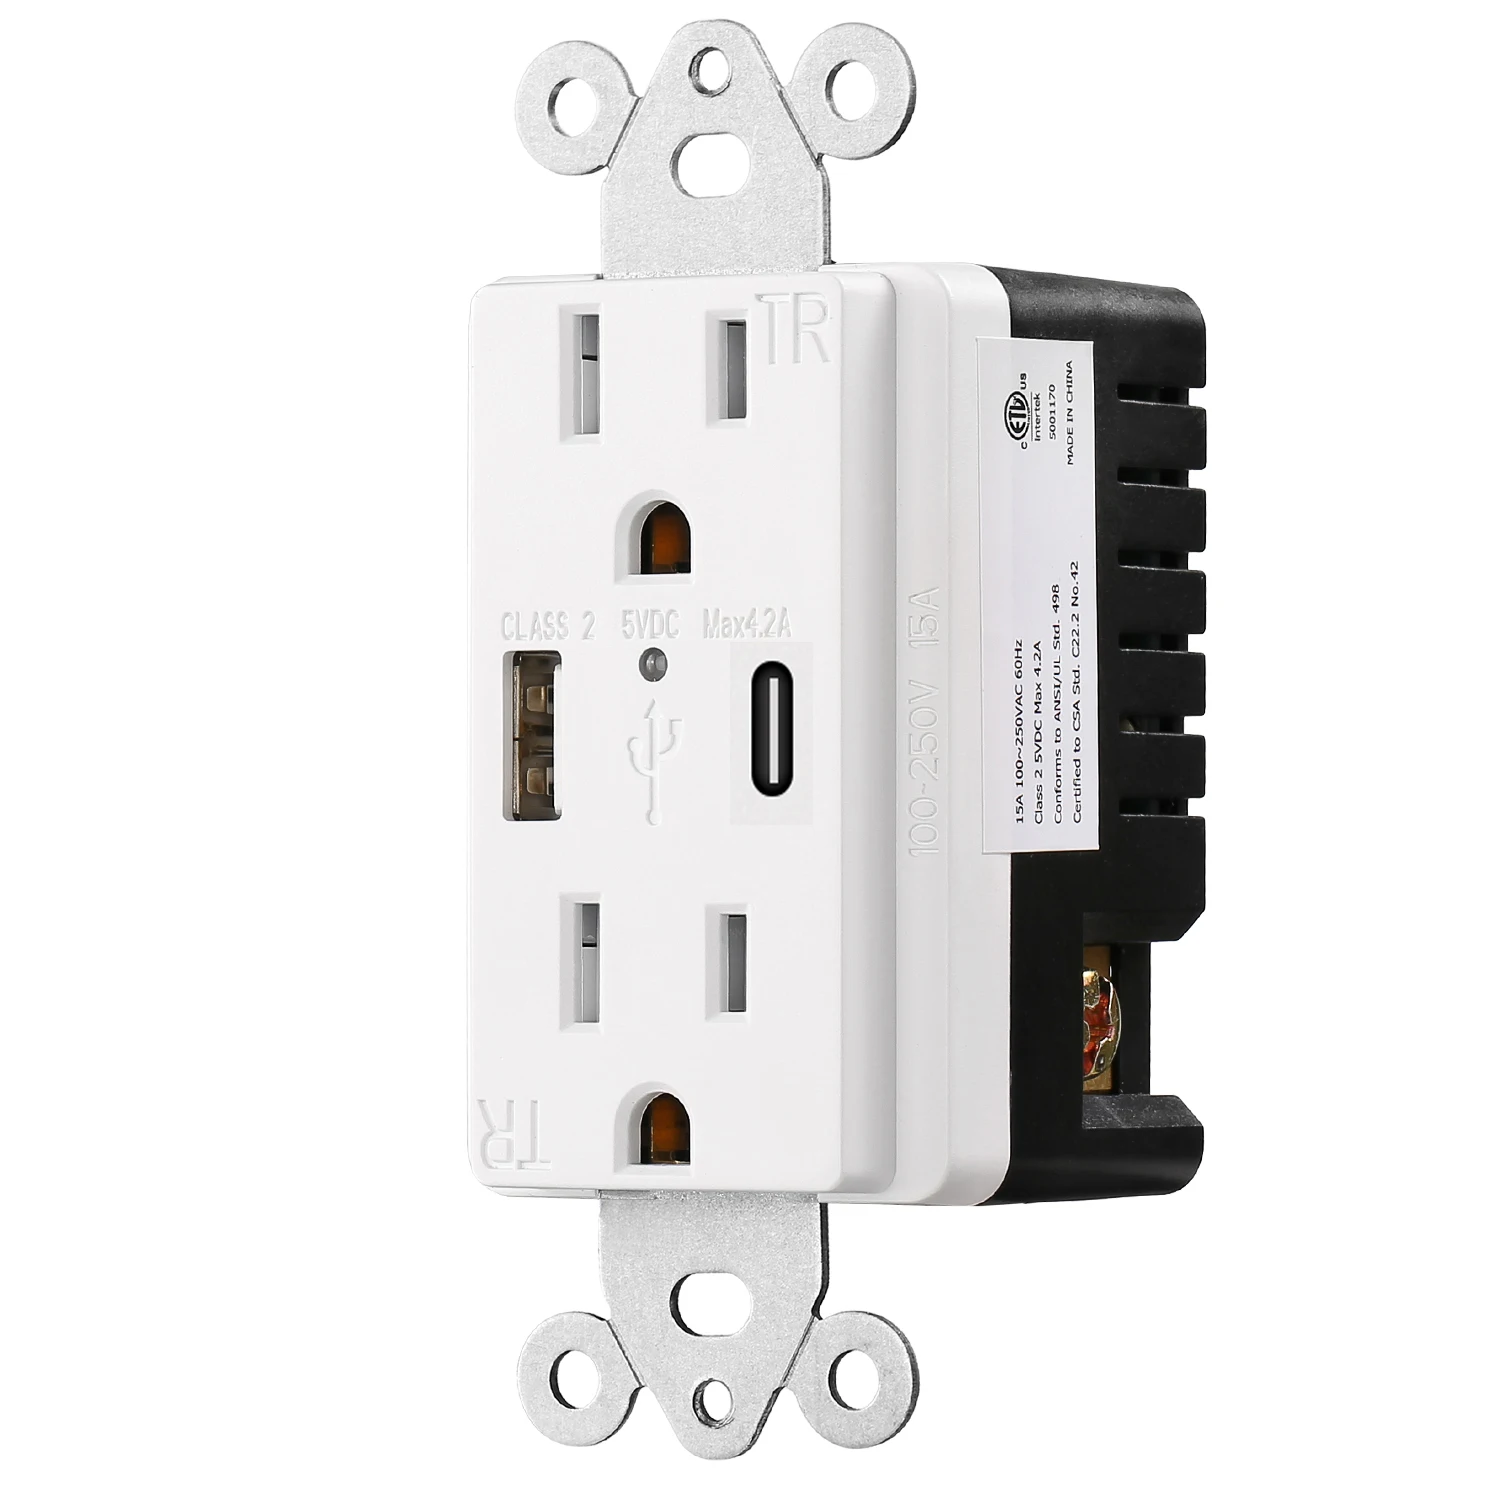 Dual Plug Electric Wall Socket Adapter Wit 2 USB Port Outlet Panel Switch US 